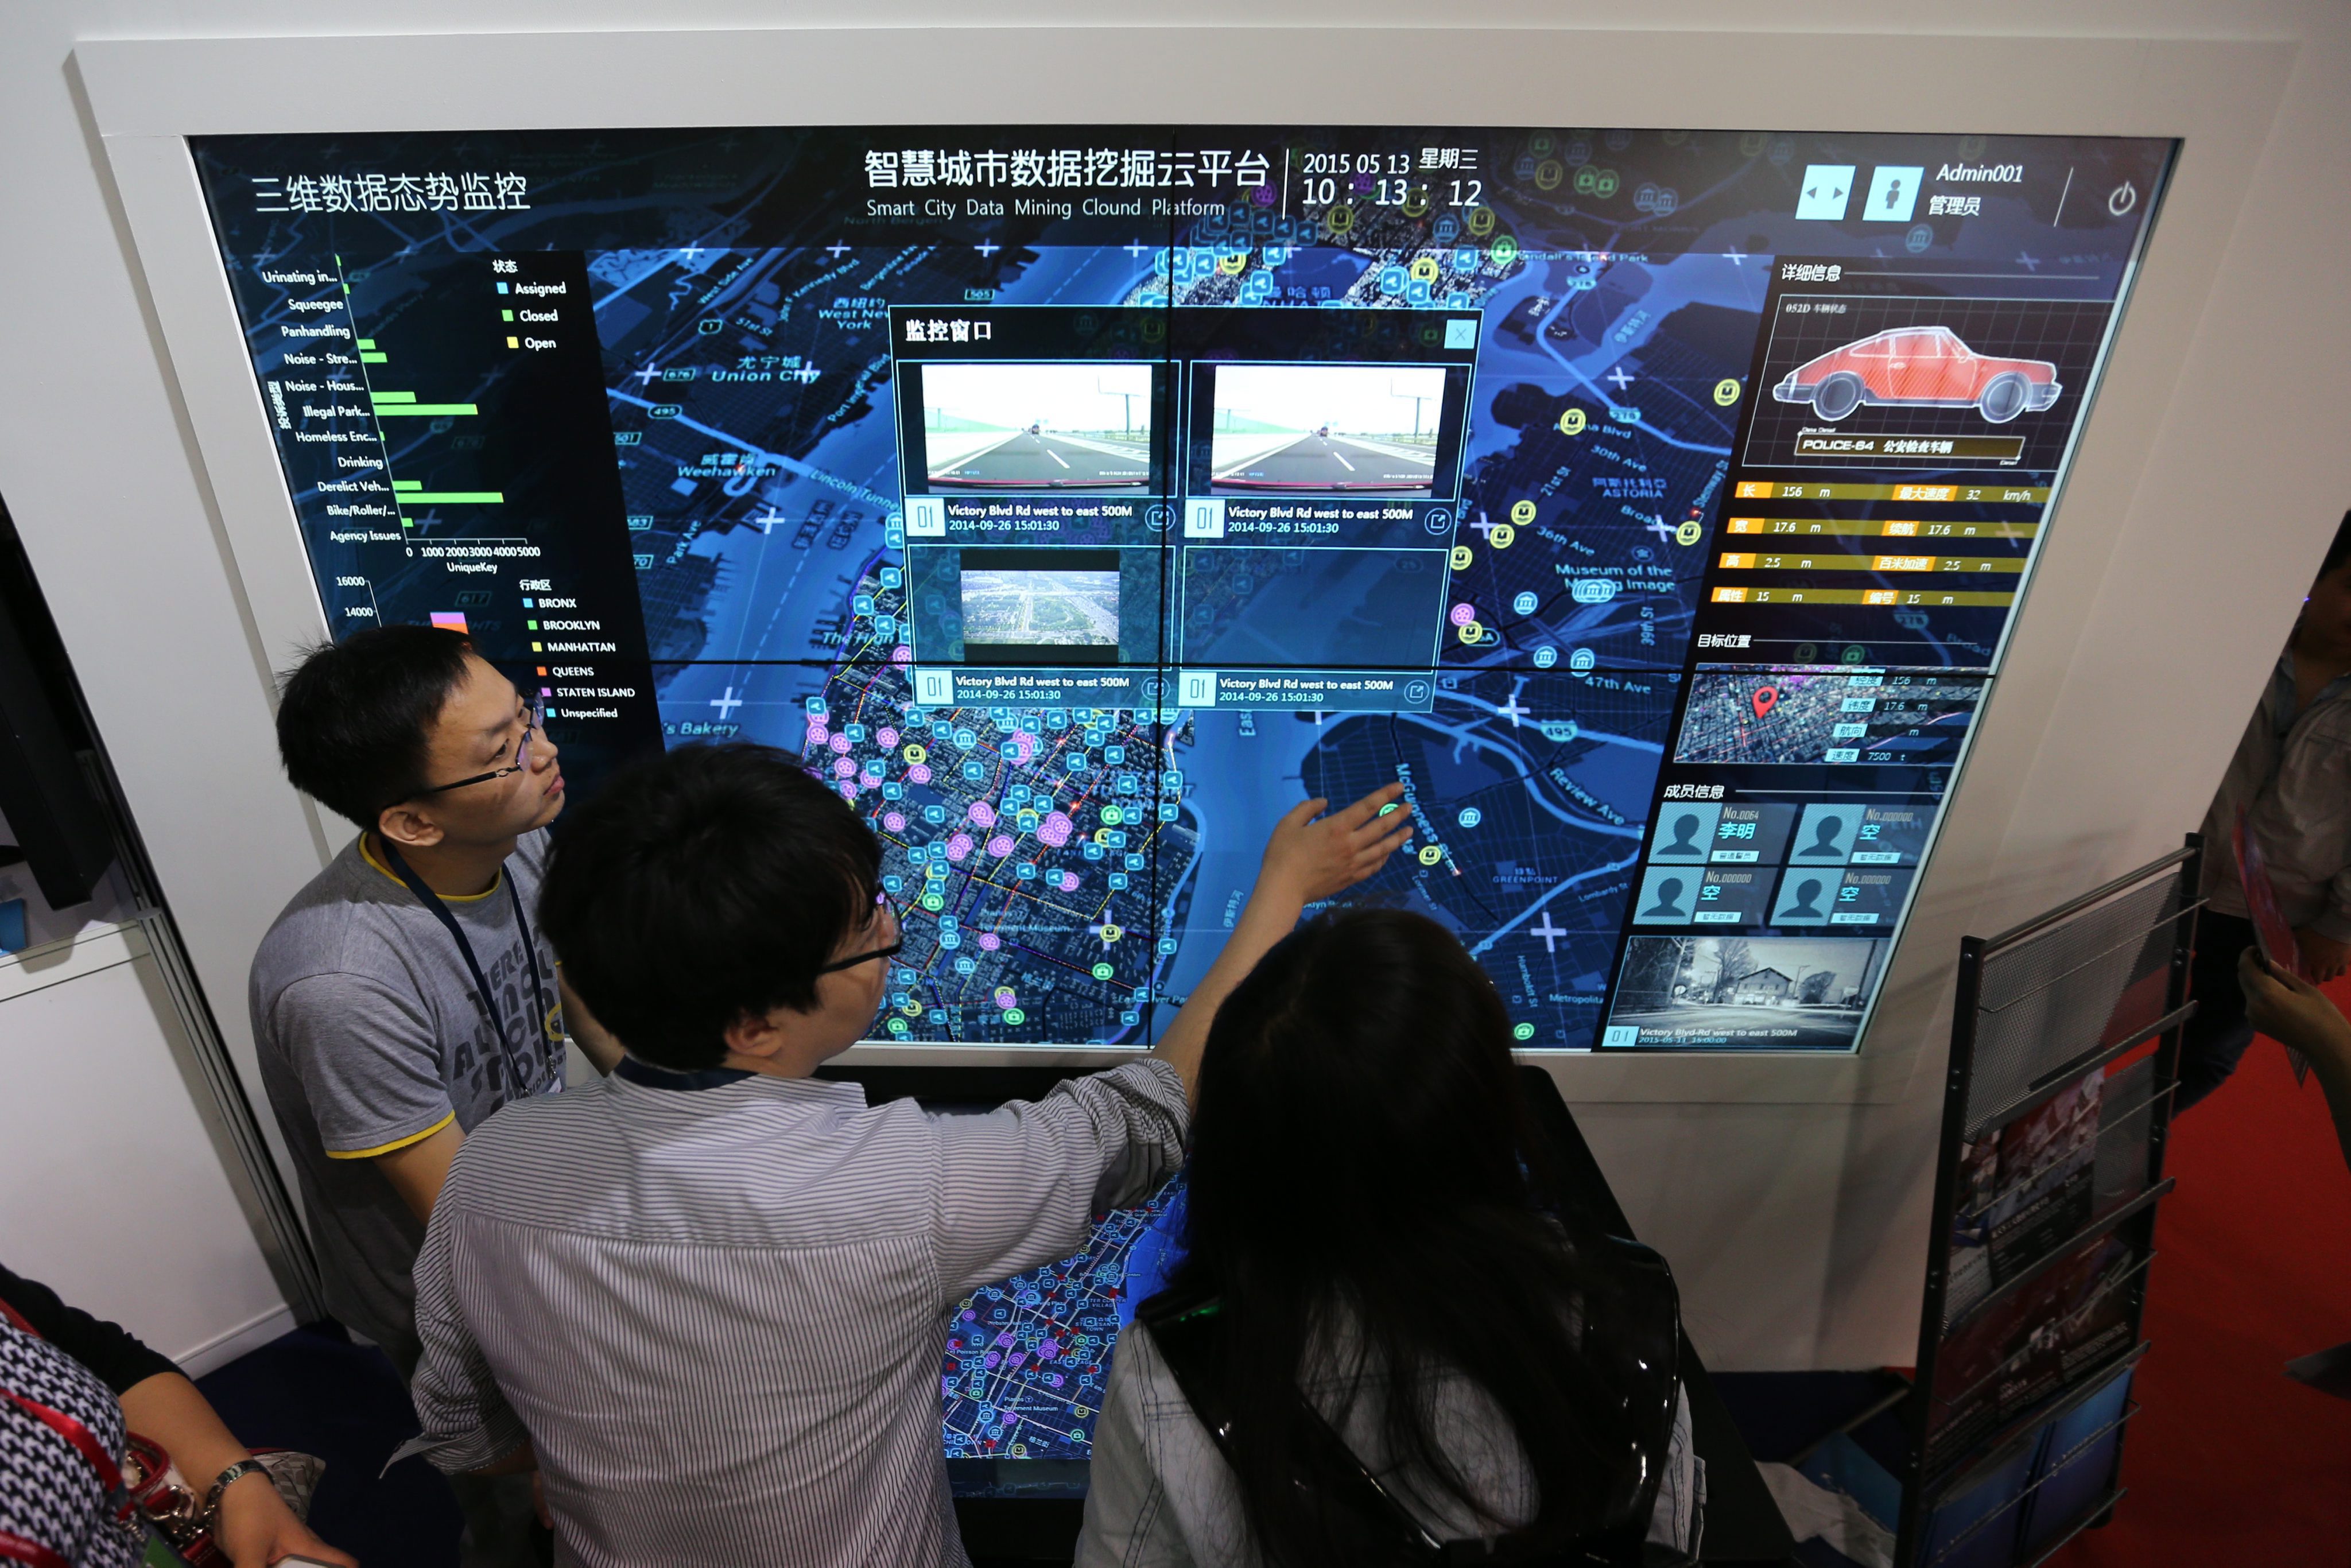 Visitors look at a screen displaying a smart city system at the 18th China Beijing International High-Tech Expo in Beijing on May 13, 2015. Photo: EPA